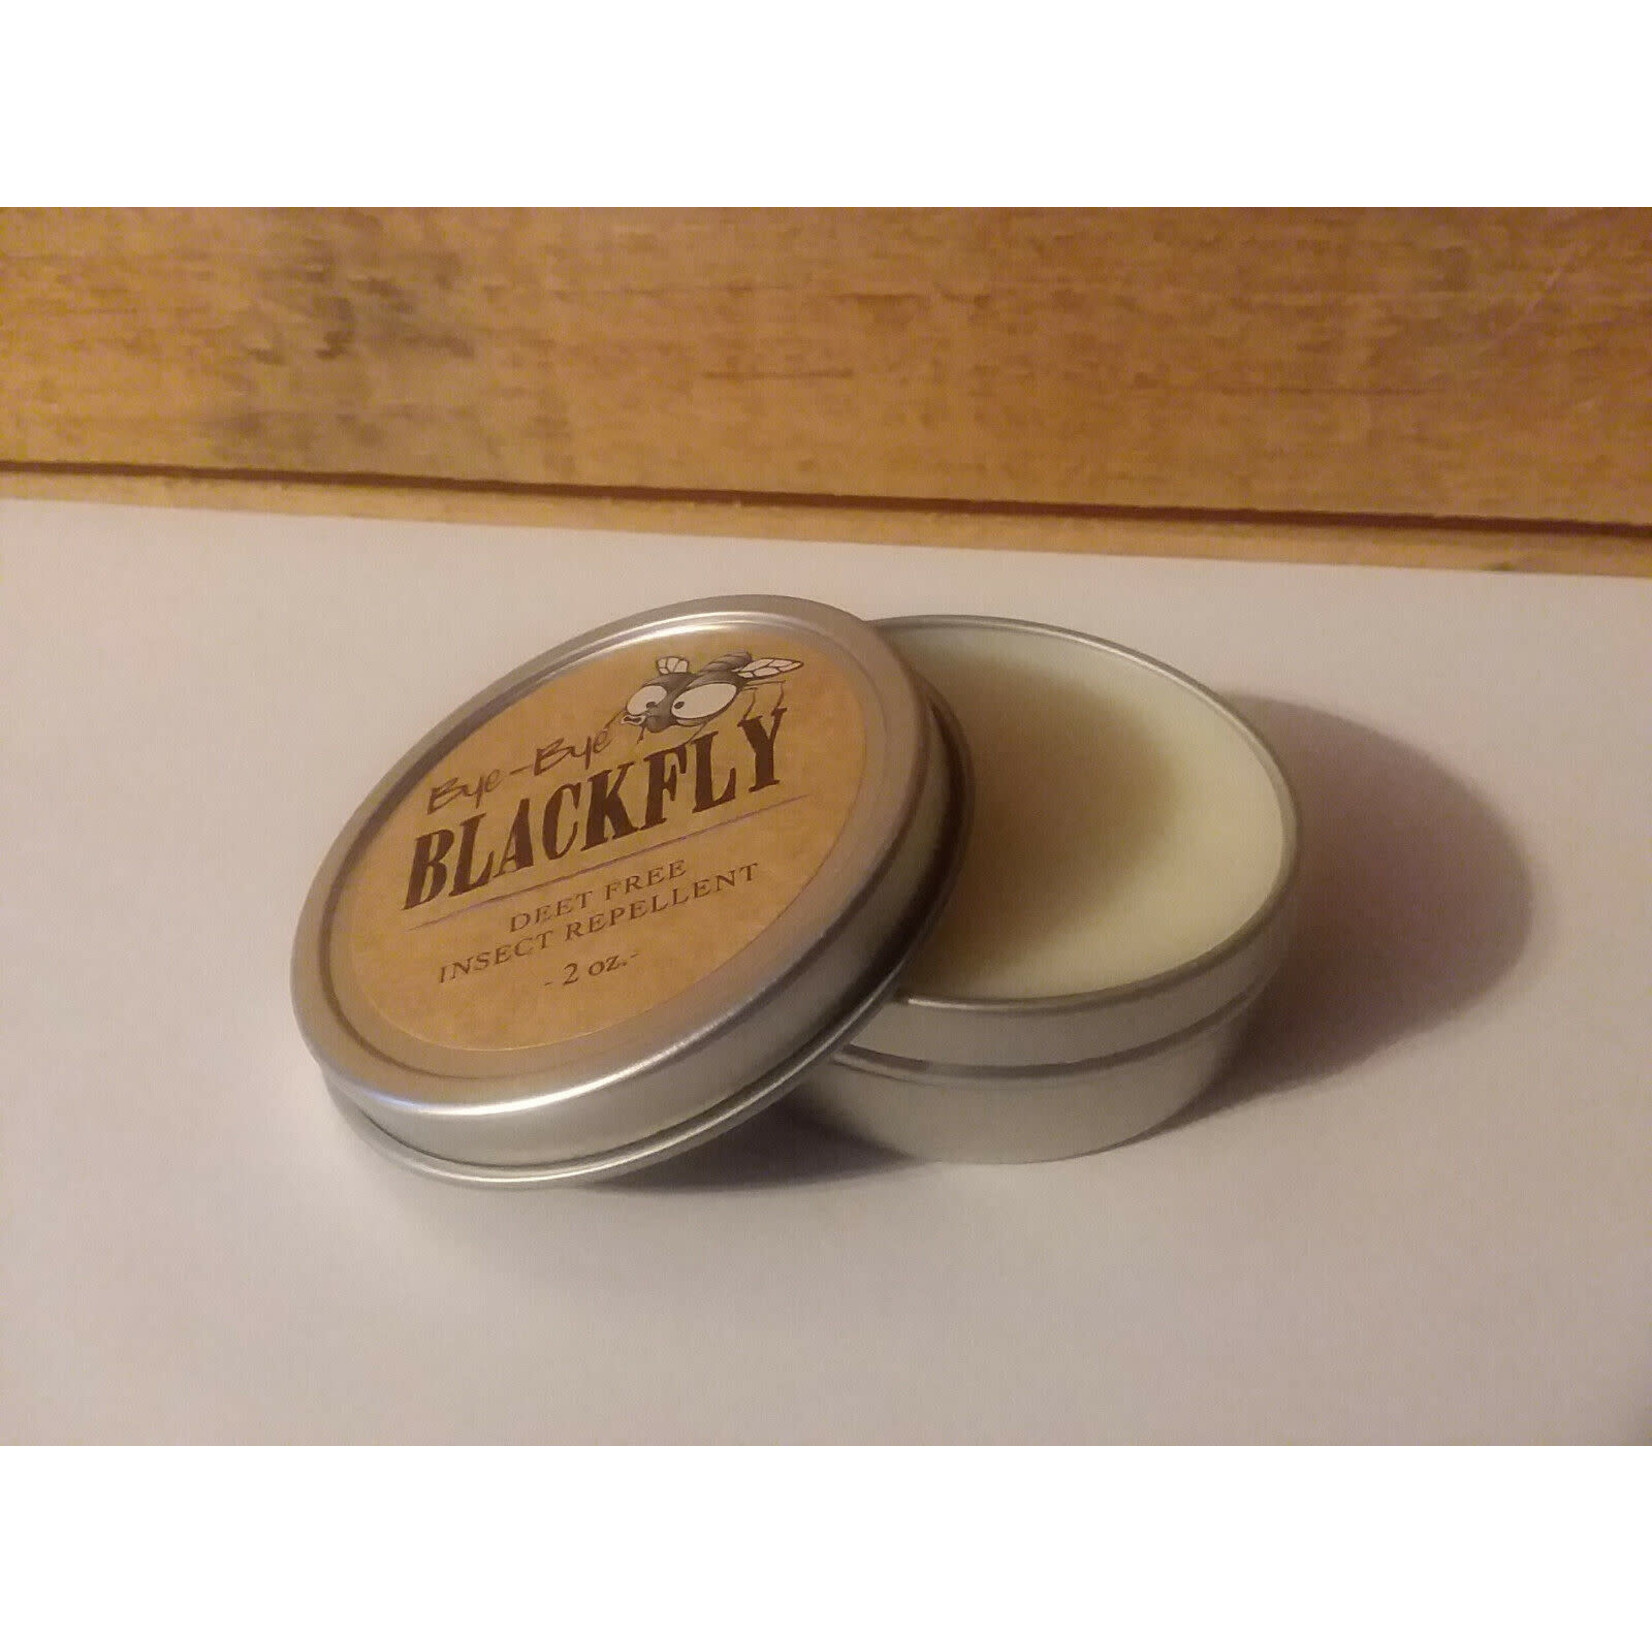 bye- bye blackfly Bye-Bye Blackfly Natural Insect Repellent 2 oz tin Made in the Adirondacks